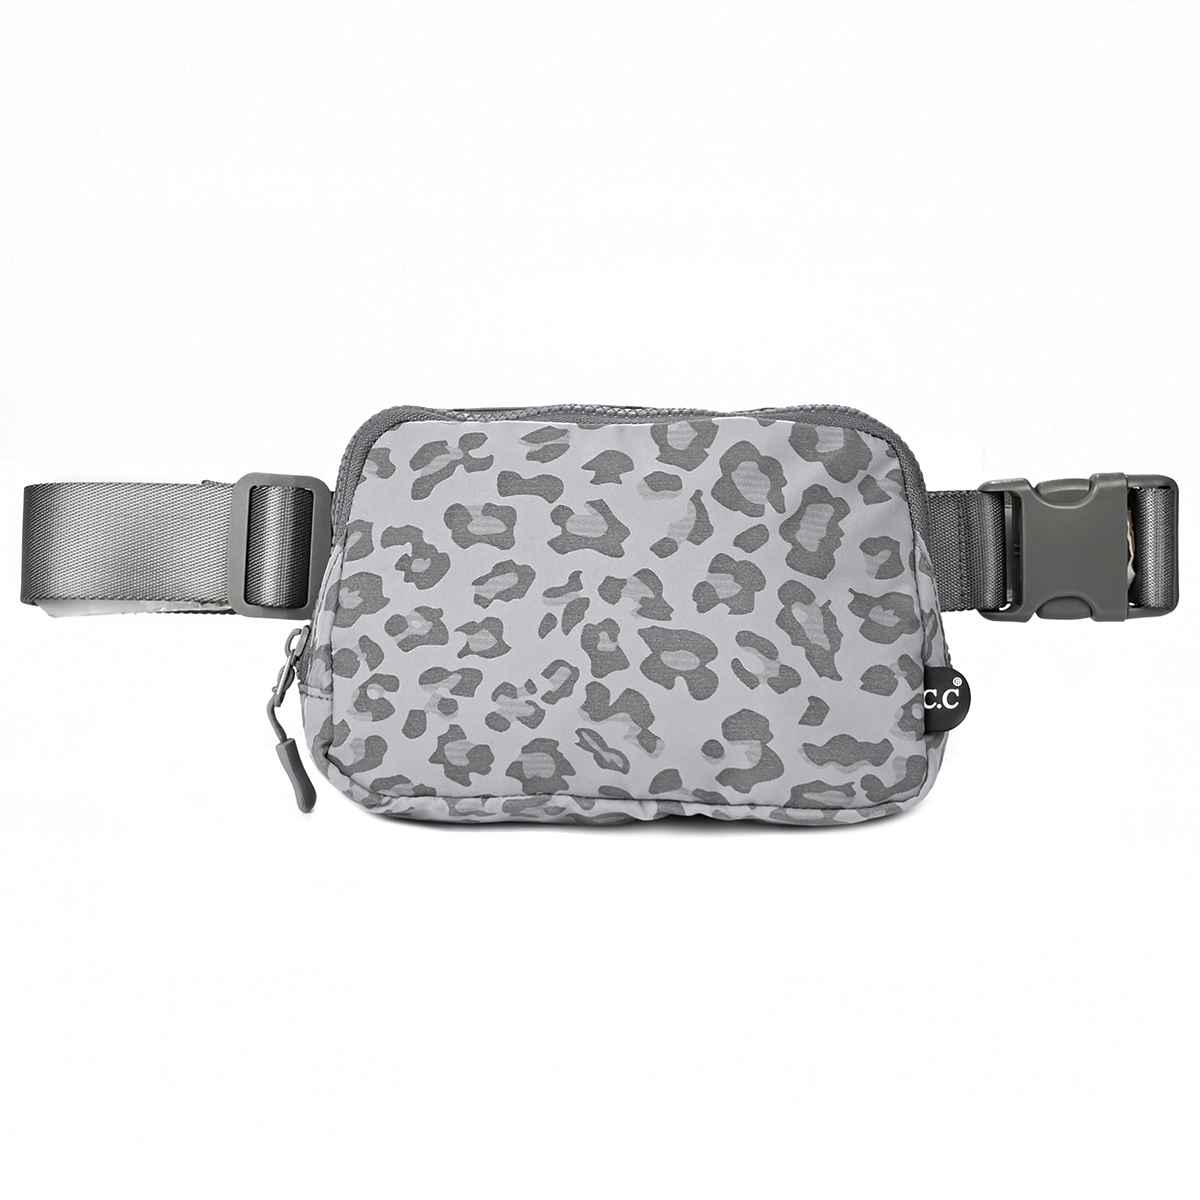 BGS4255 Leopard Fanny Pack - Honeytote